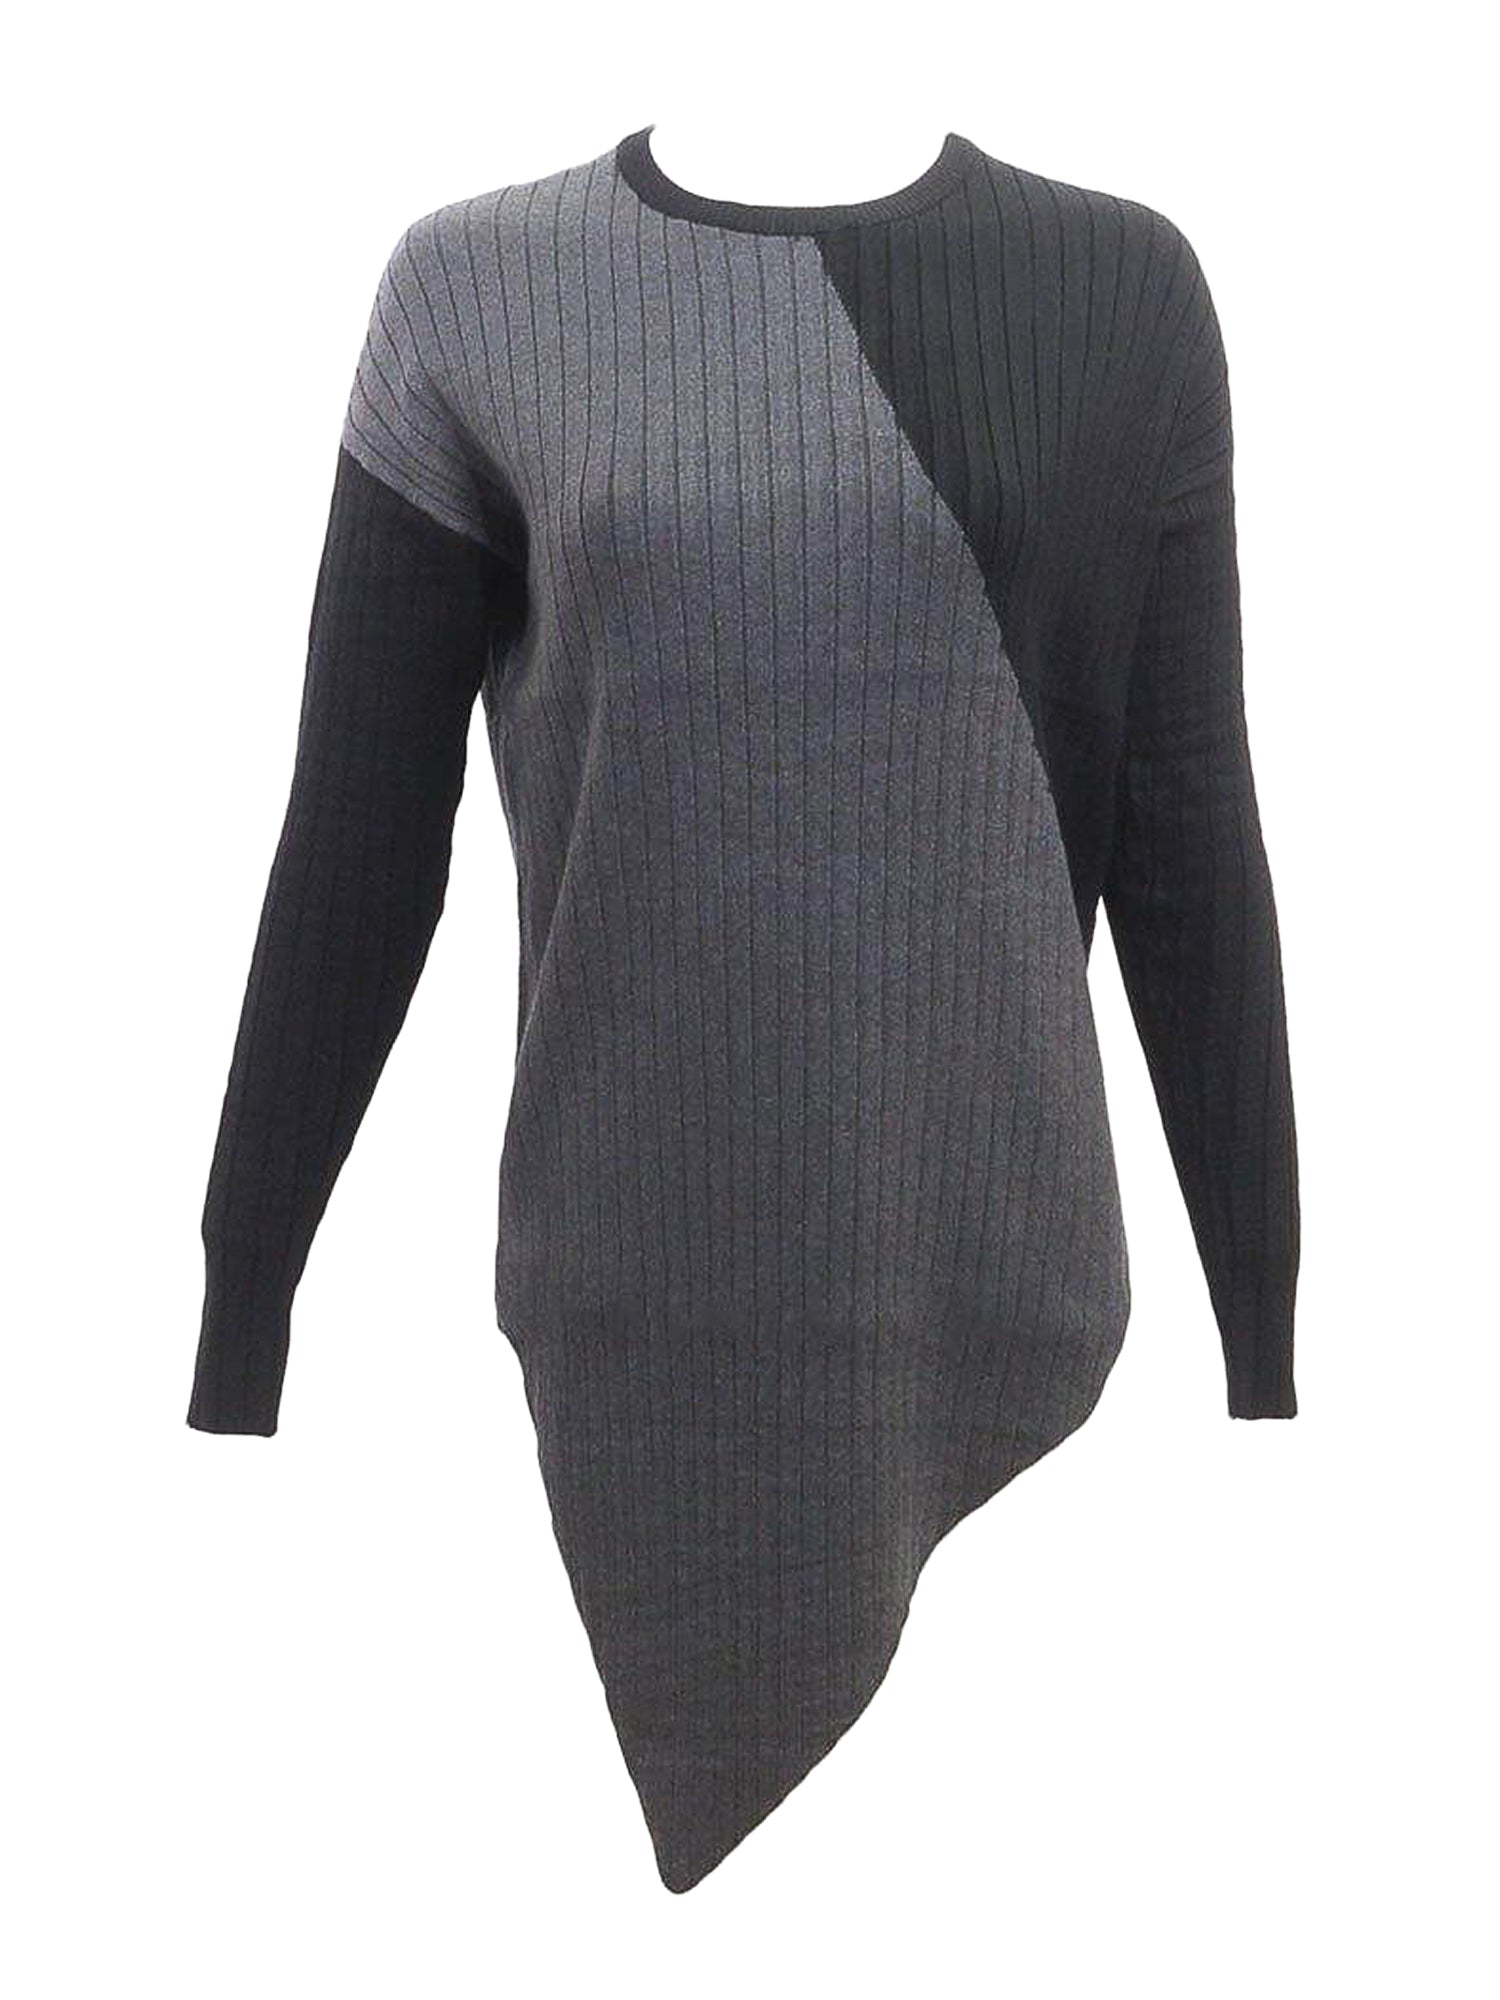 Diciannove Ribbed Sweater PinkOrchidFashion